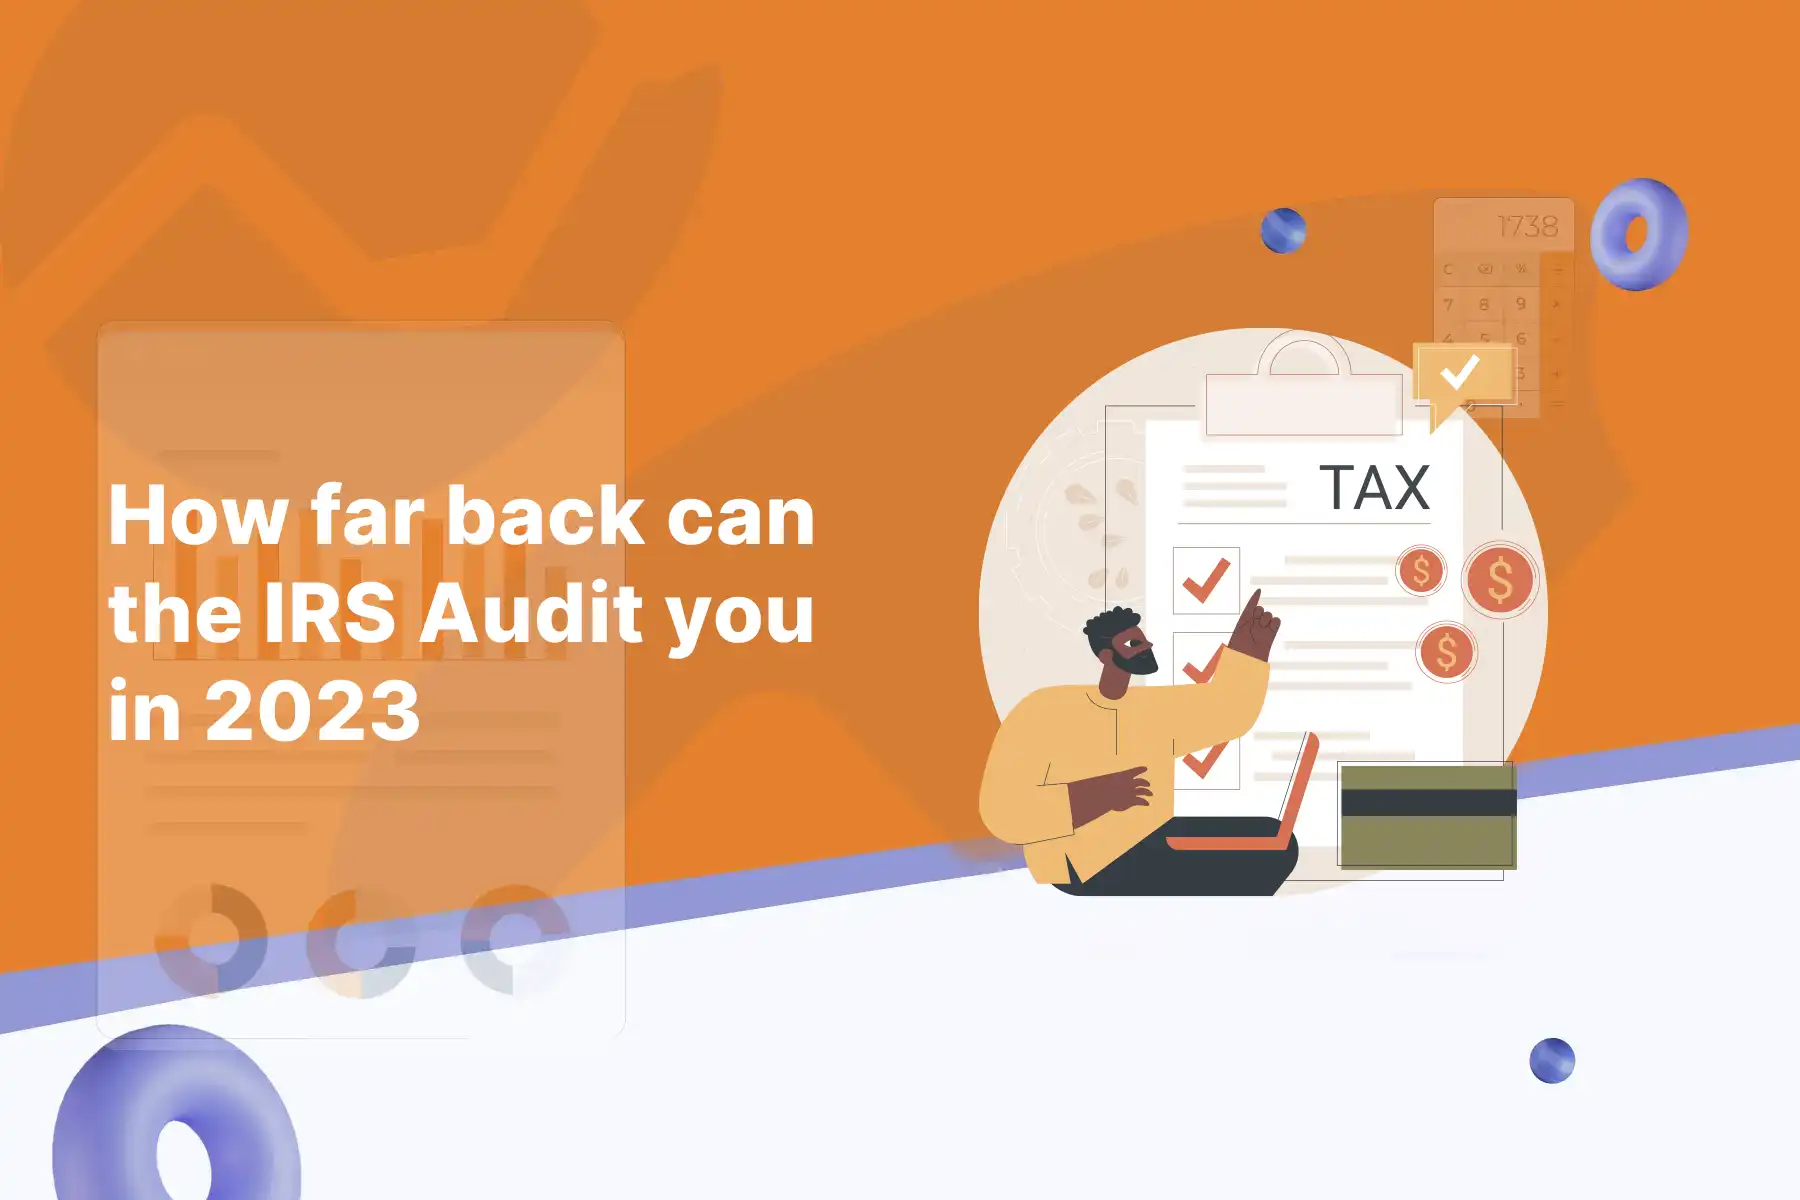 How far back can the IRS Audit you in 2023